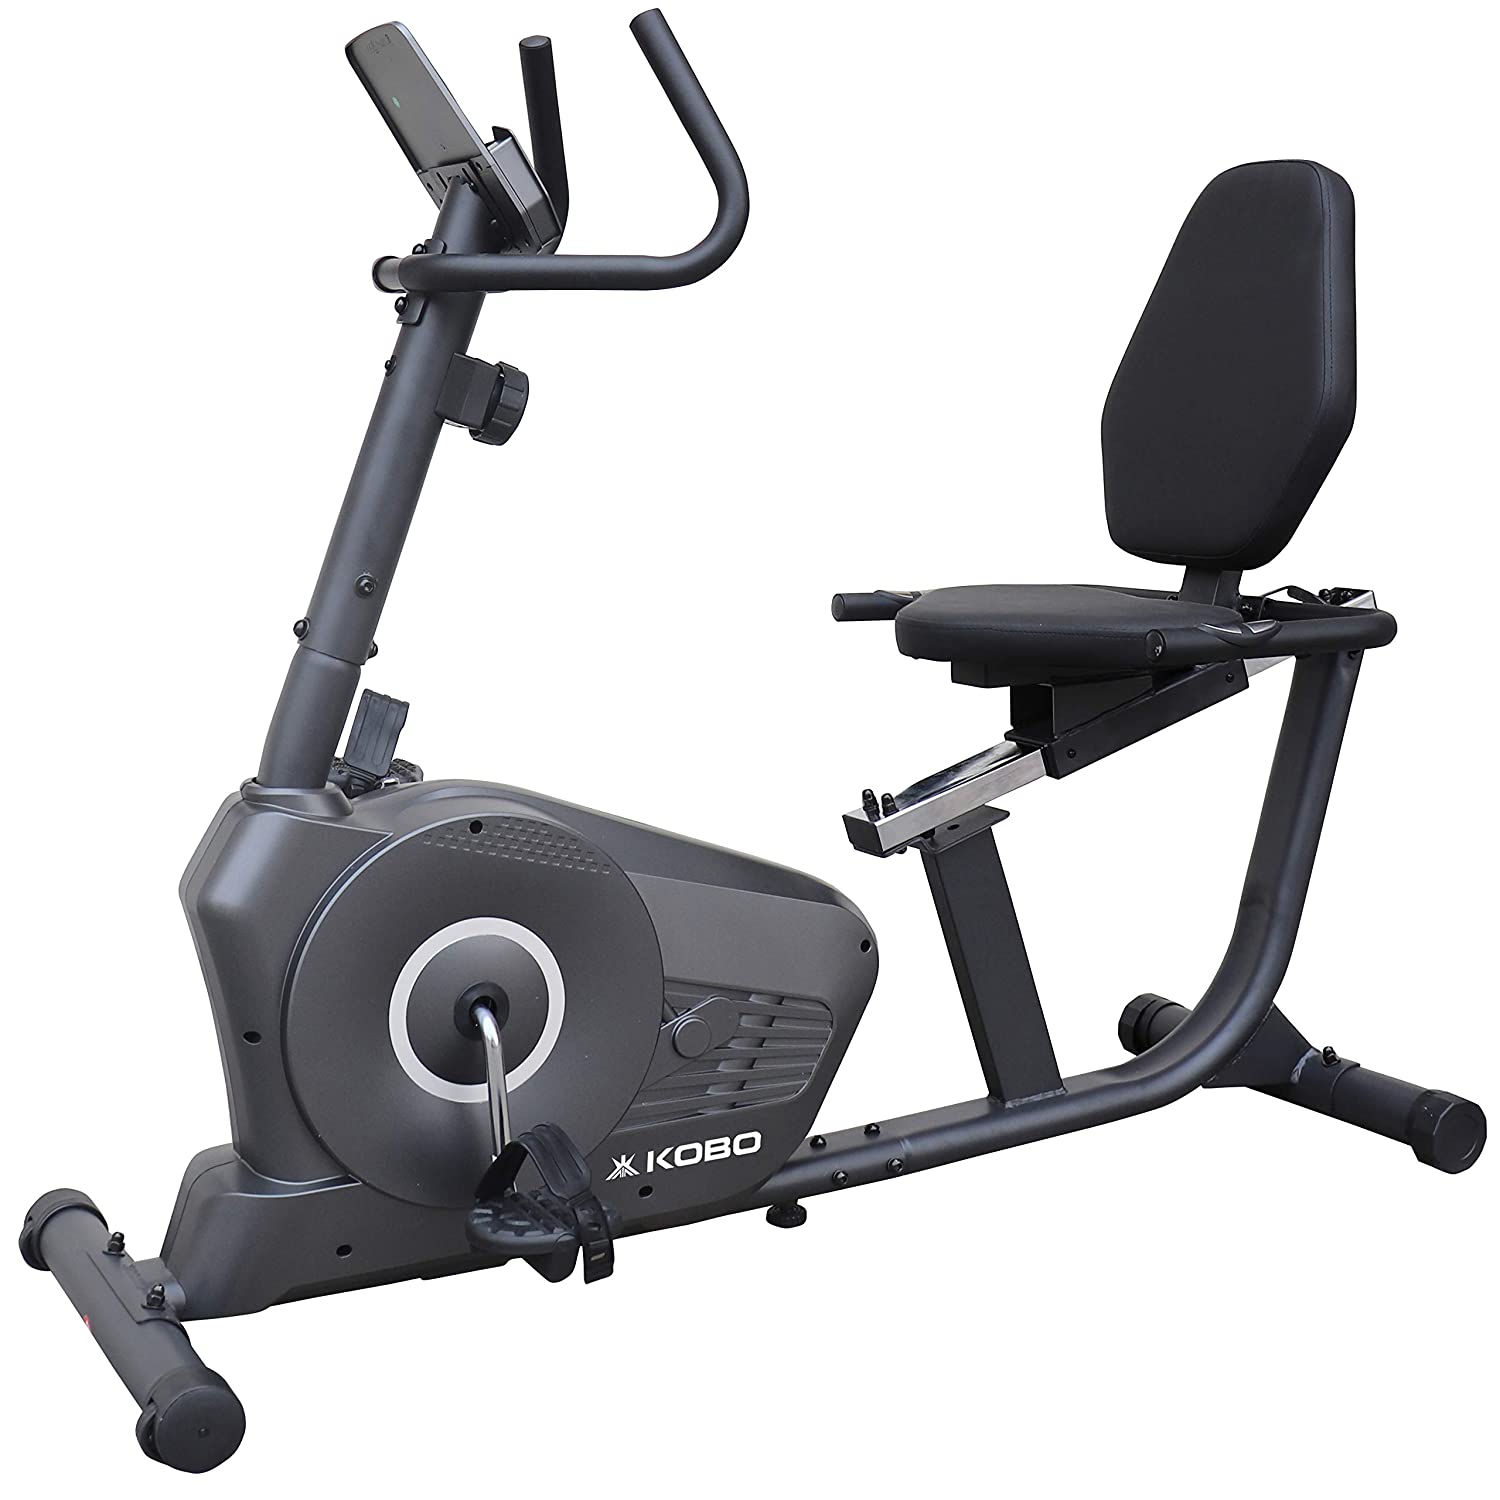 Recumbent gym bike with Back Support